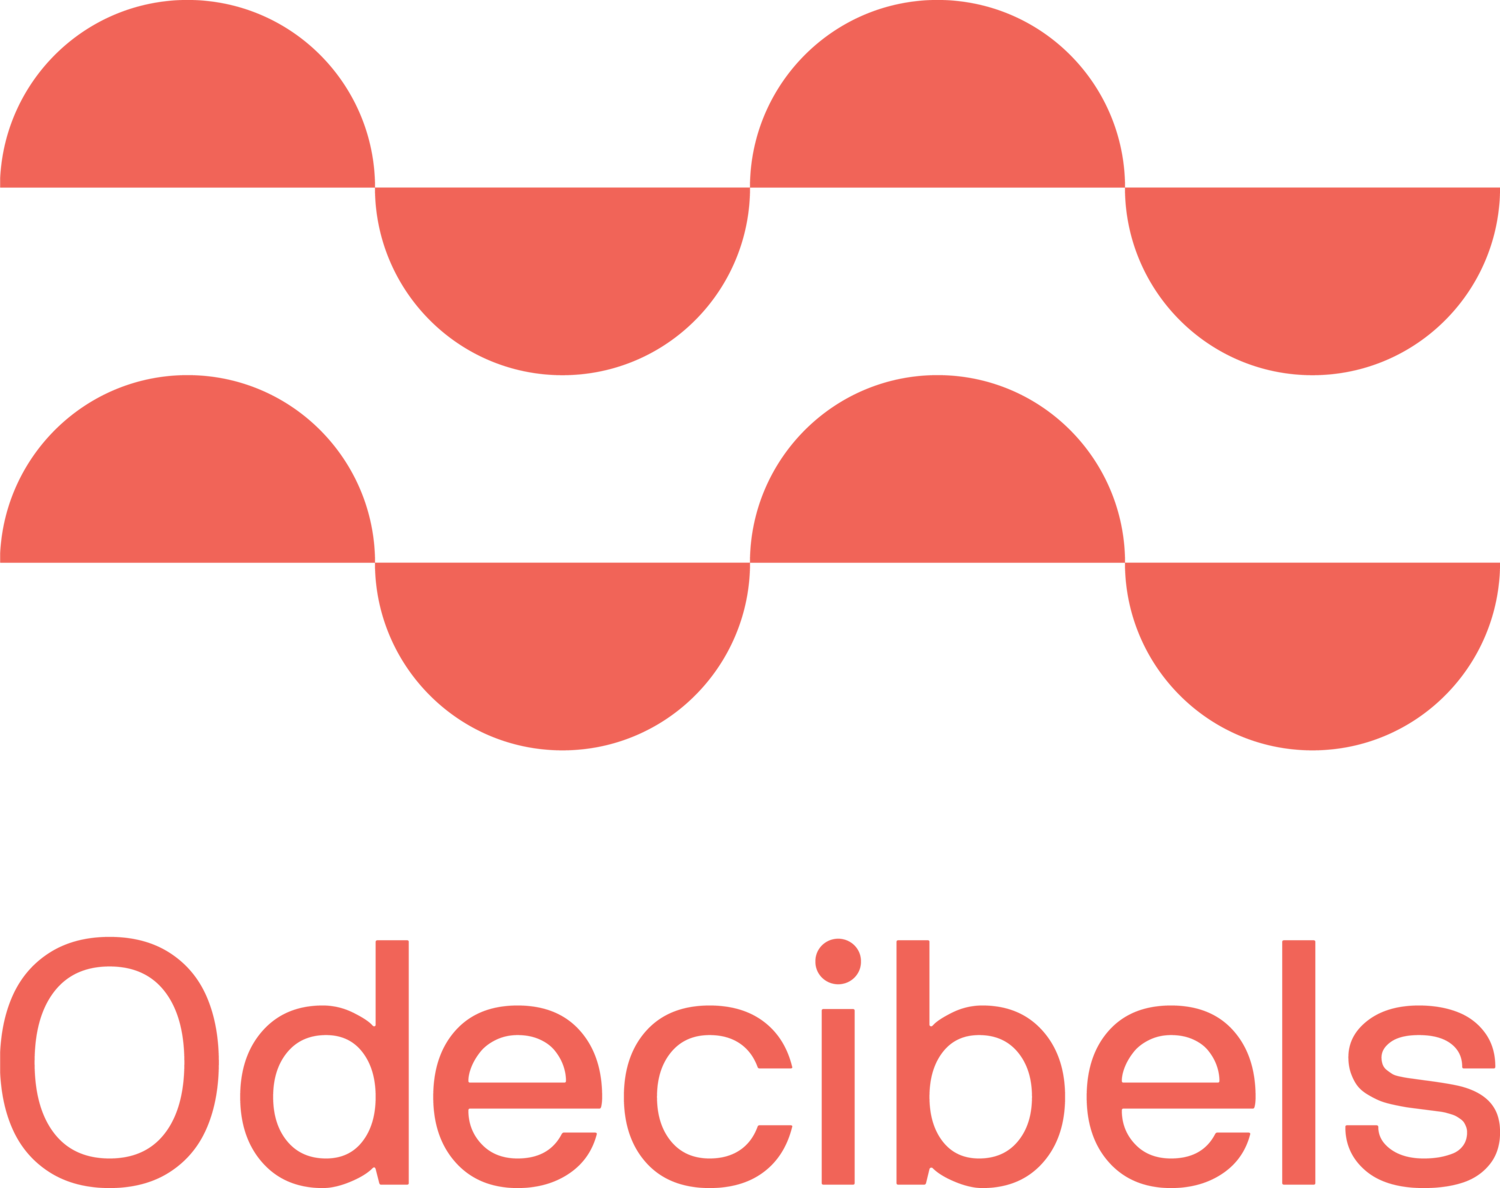 0decibels ambient music licensing and curation